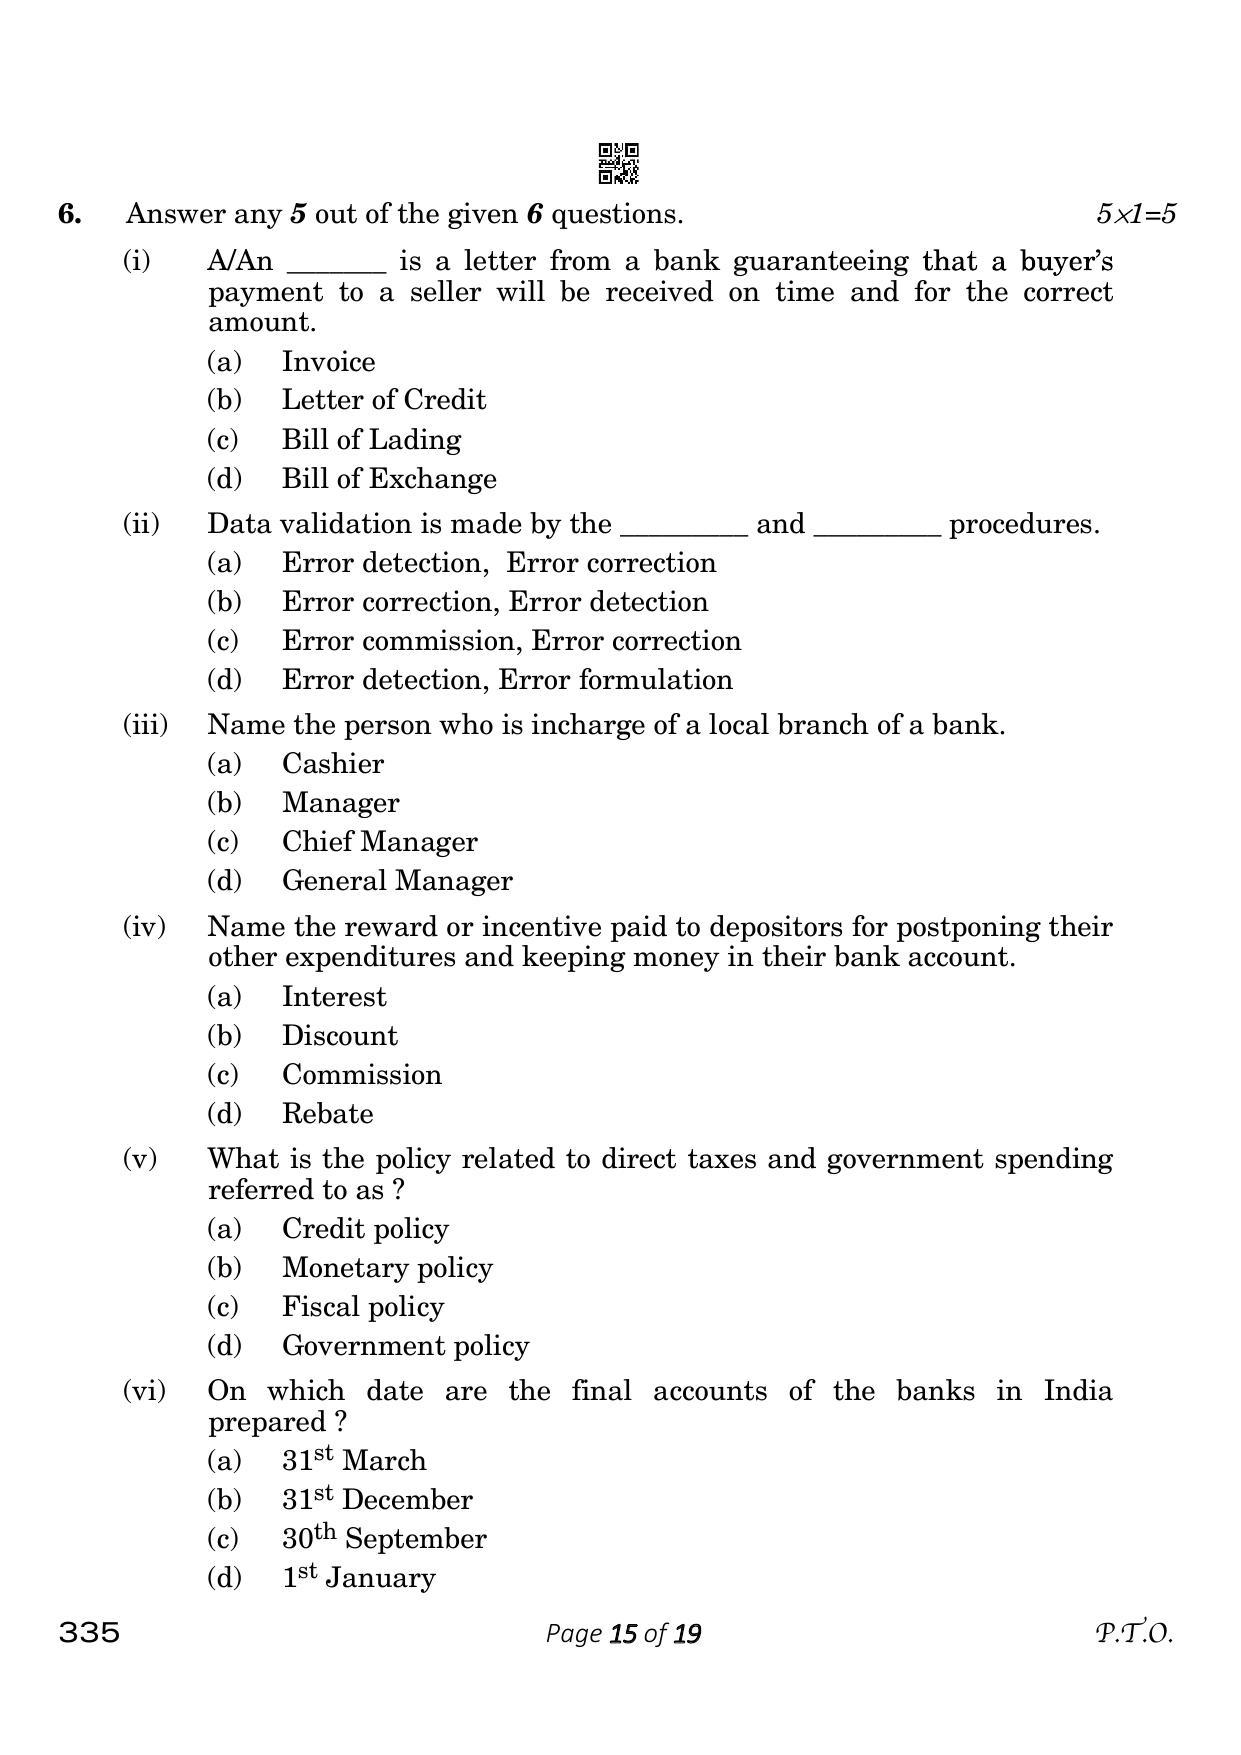 CBSE Class 12 335_Banking 2023 Question Paper - Page 15